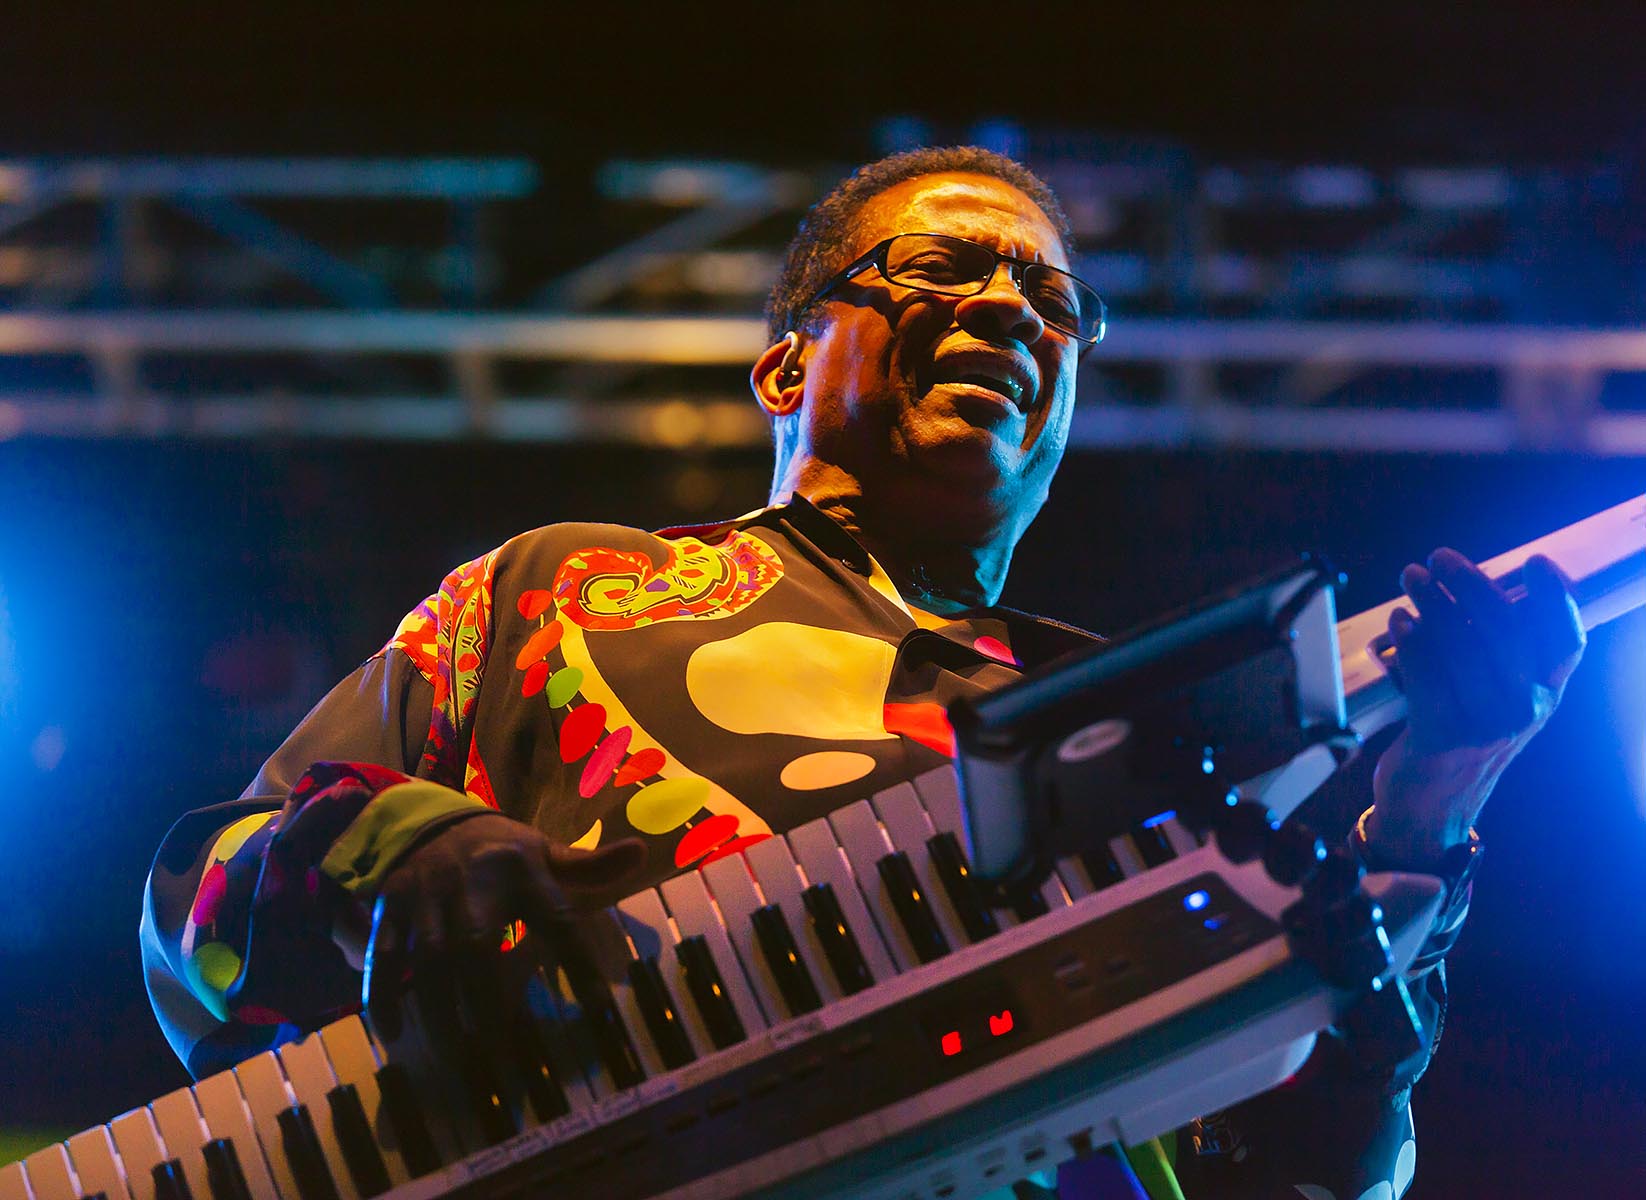 HERBIE HANCOCK preforms on the main stage at the MONTEREY JAZZ FESTIVAL